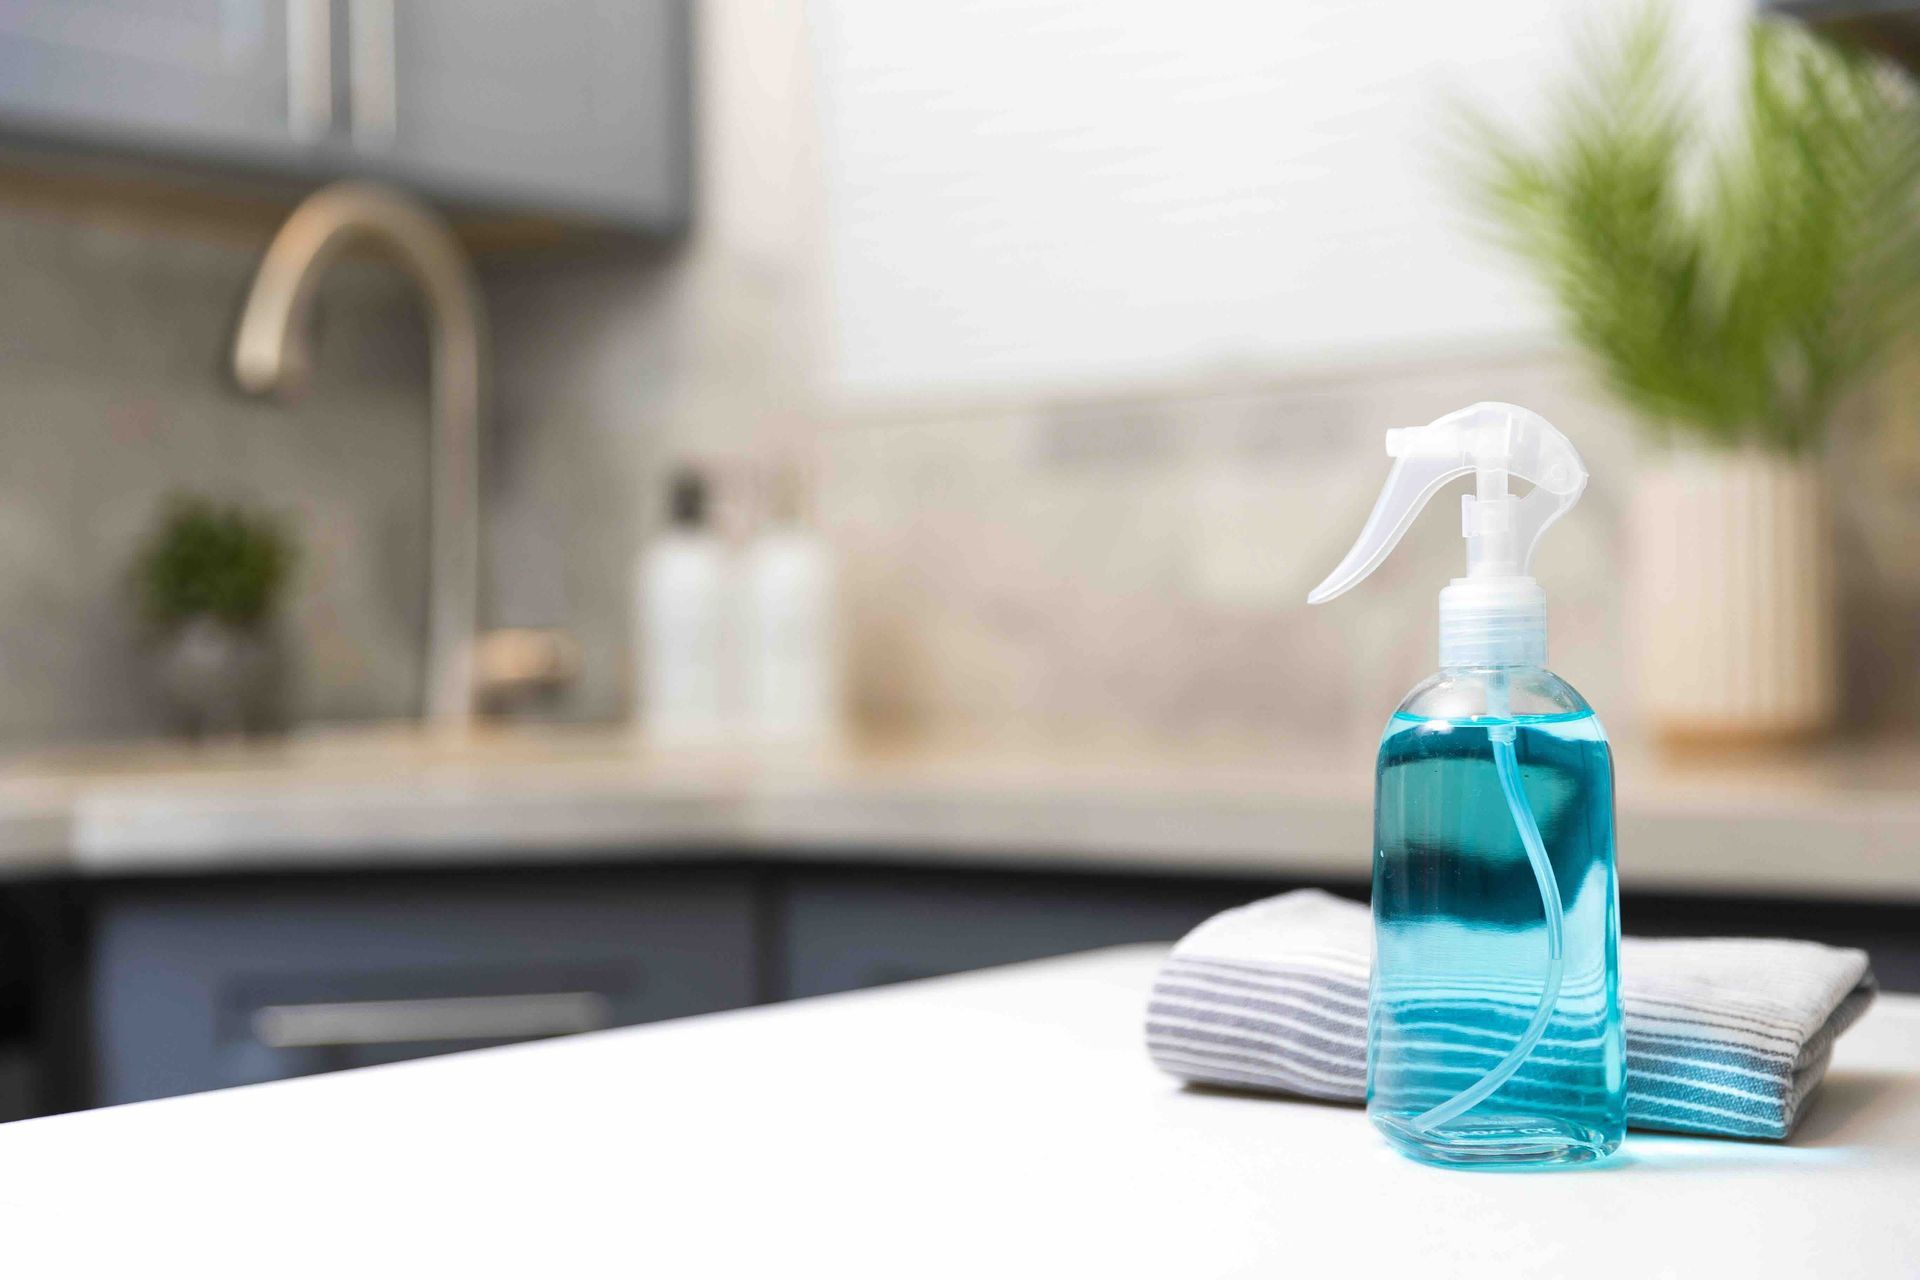 a spray bottle and a towel are on a kitchen counter.